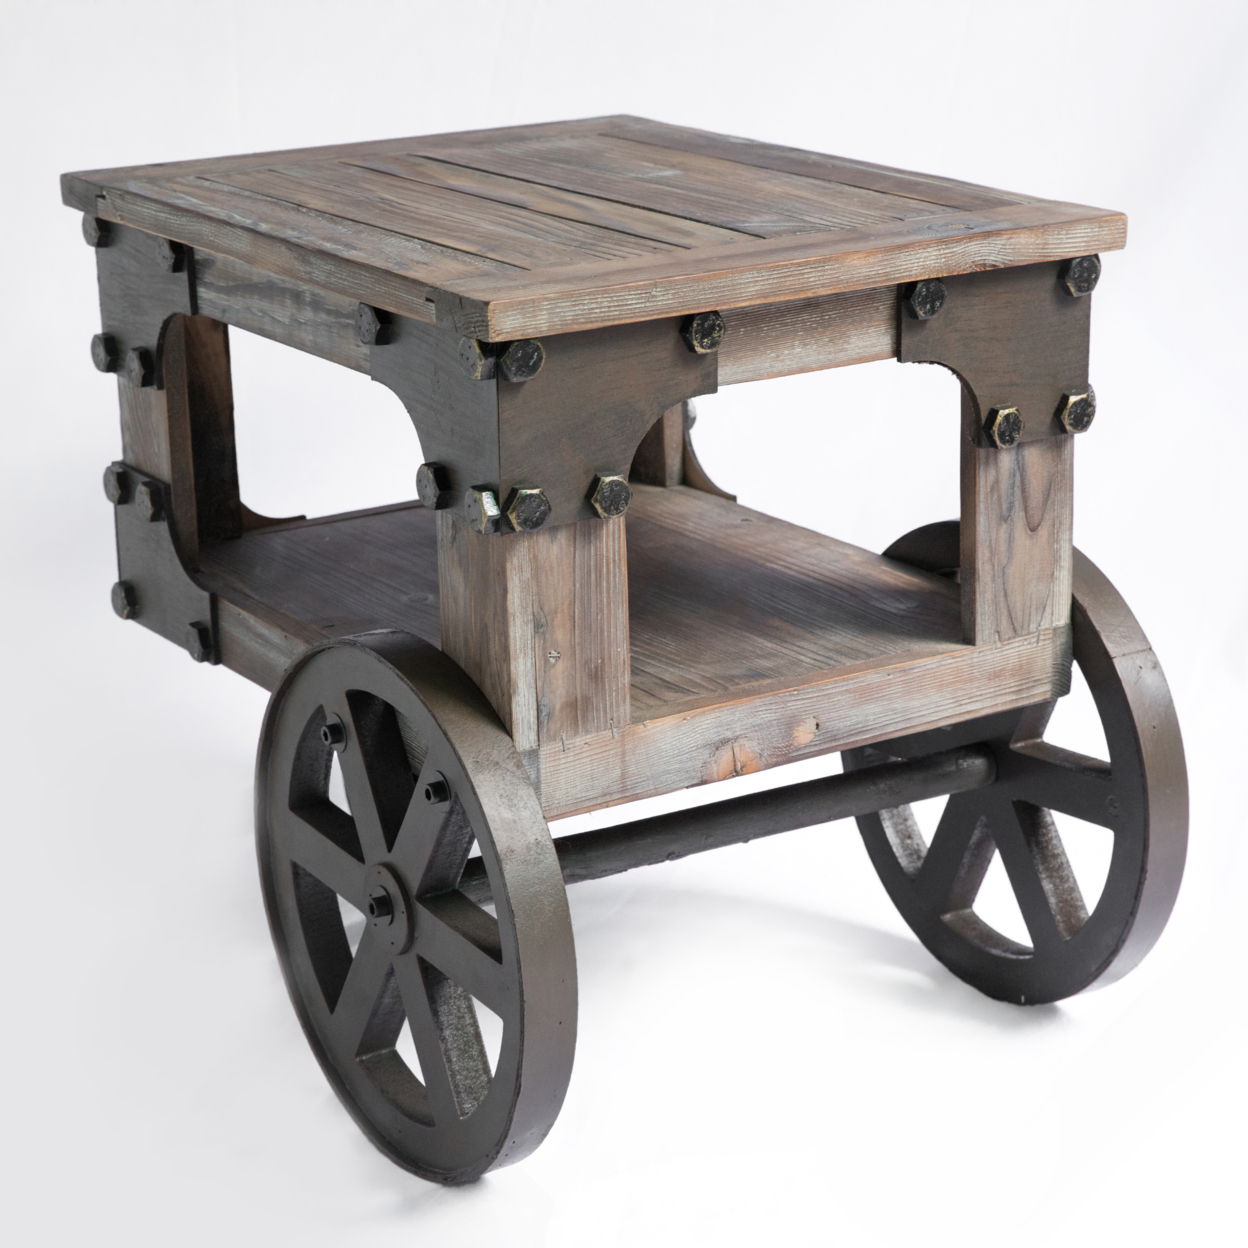 Industrial Wagon Style Small Rustic End Table With Storage Shelf And Wheels